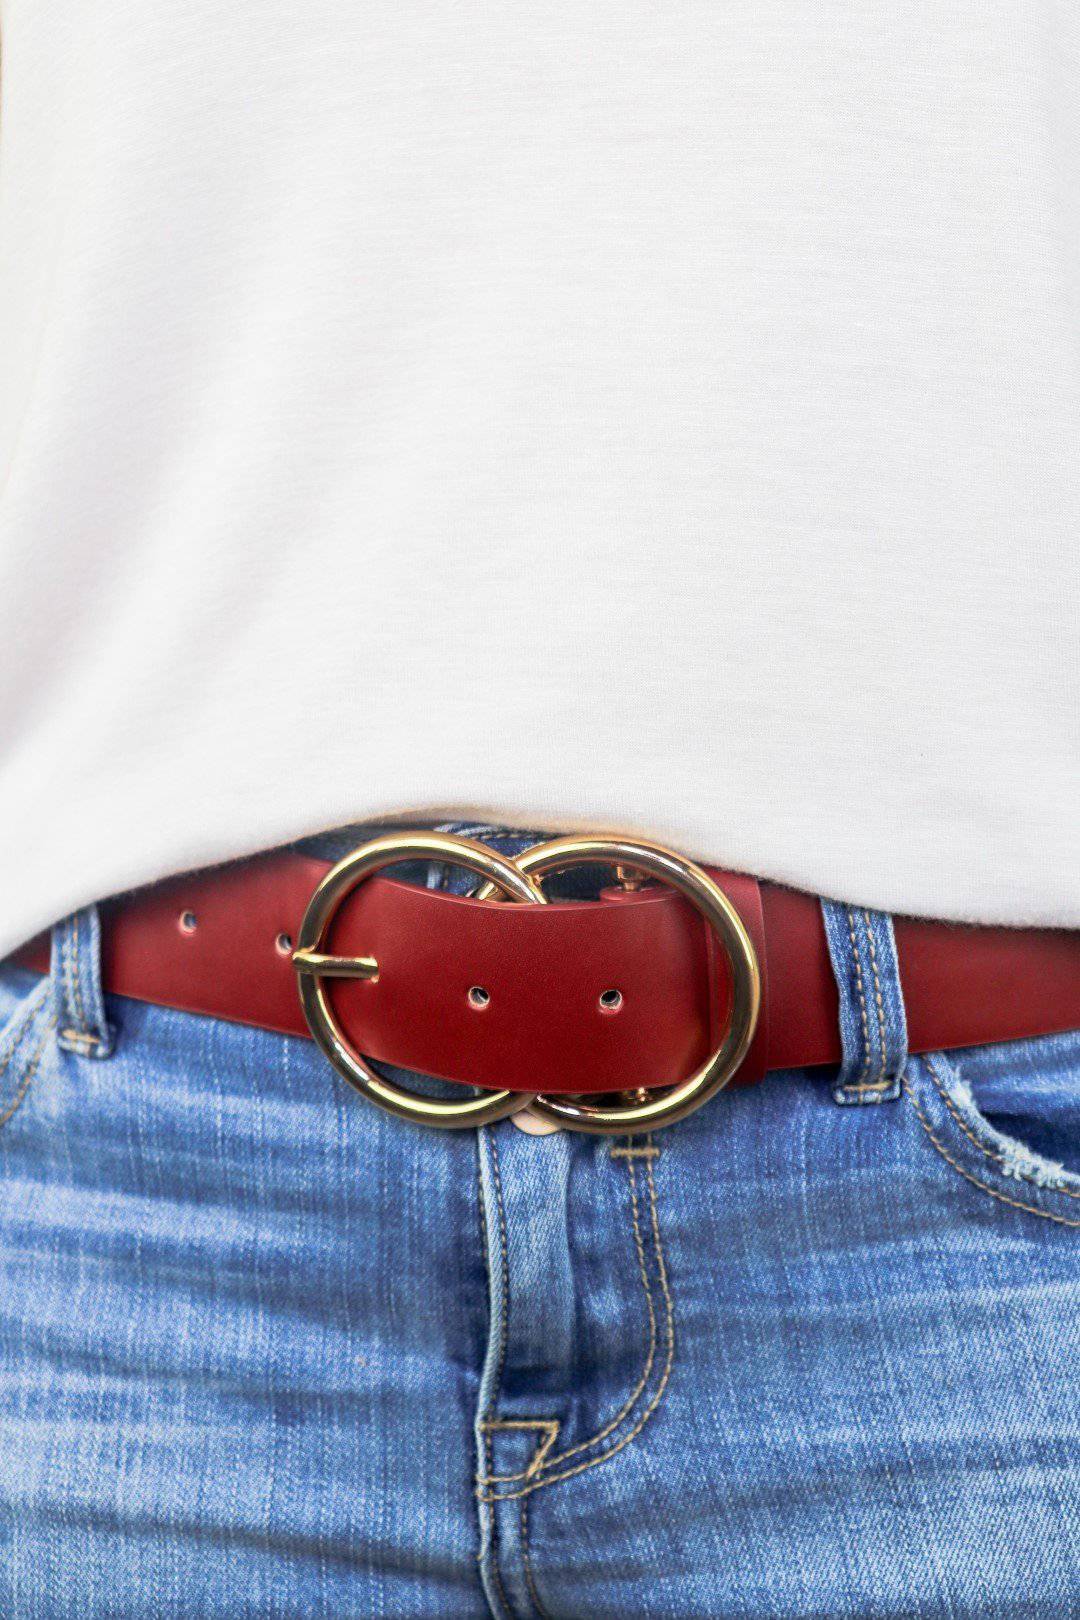 Large OO Ring Burgundy Belt with Gold Circle Belt Buckle - Select Trends Boutique